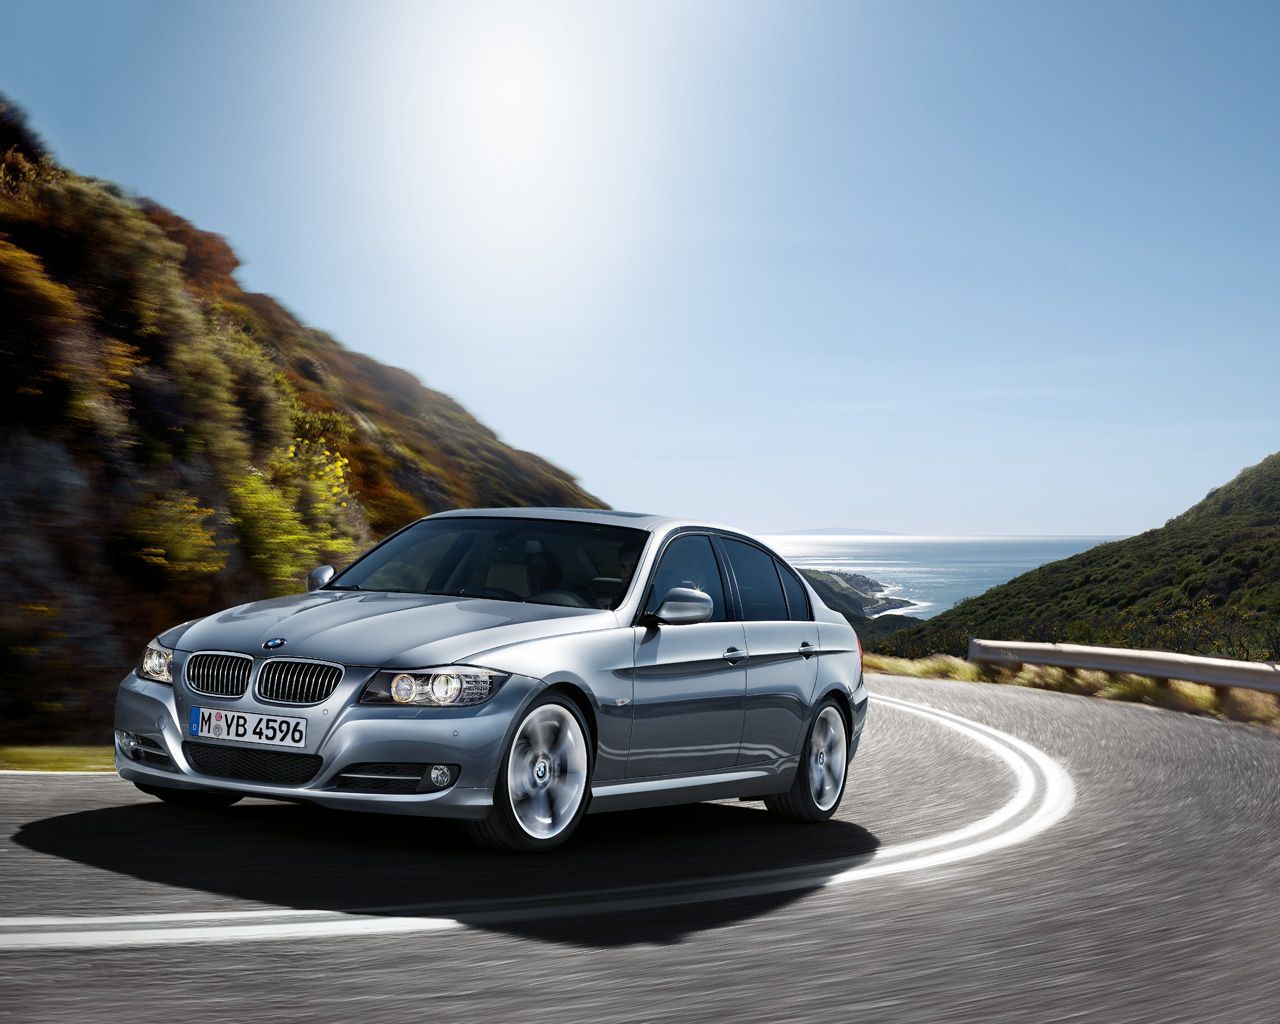 Bmw E90 Wallpapers Group 71